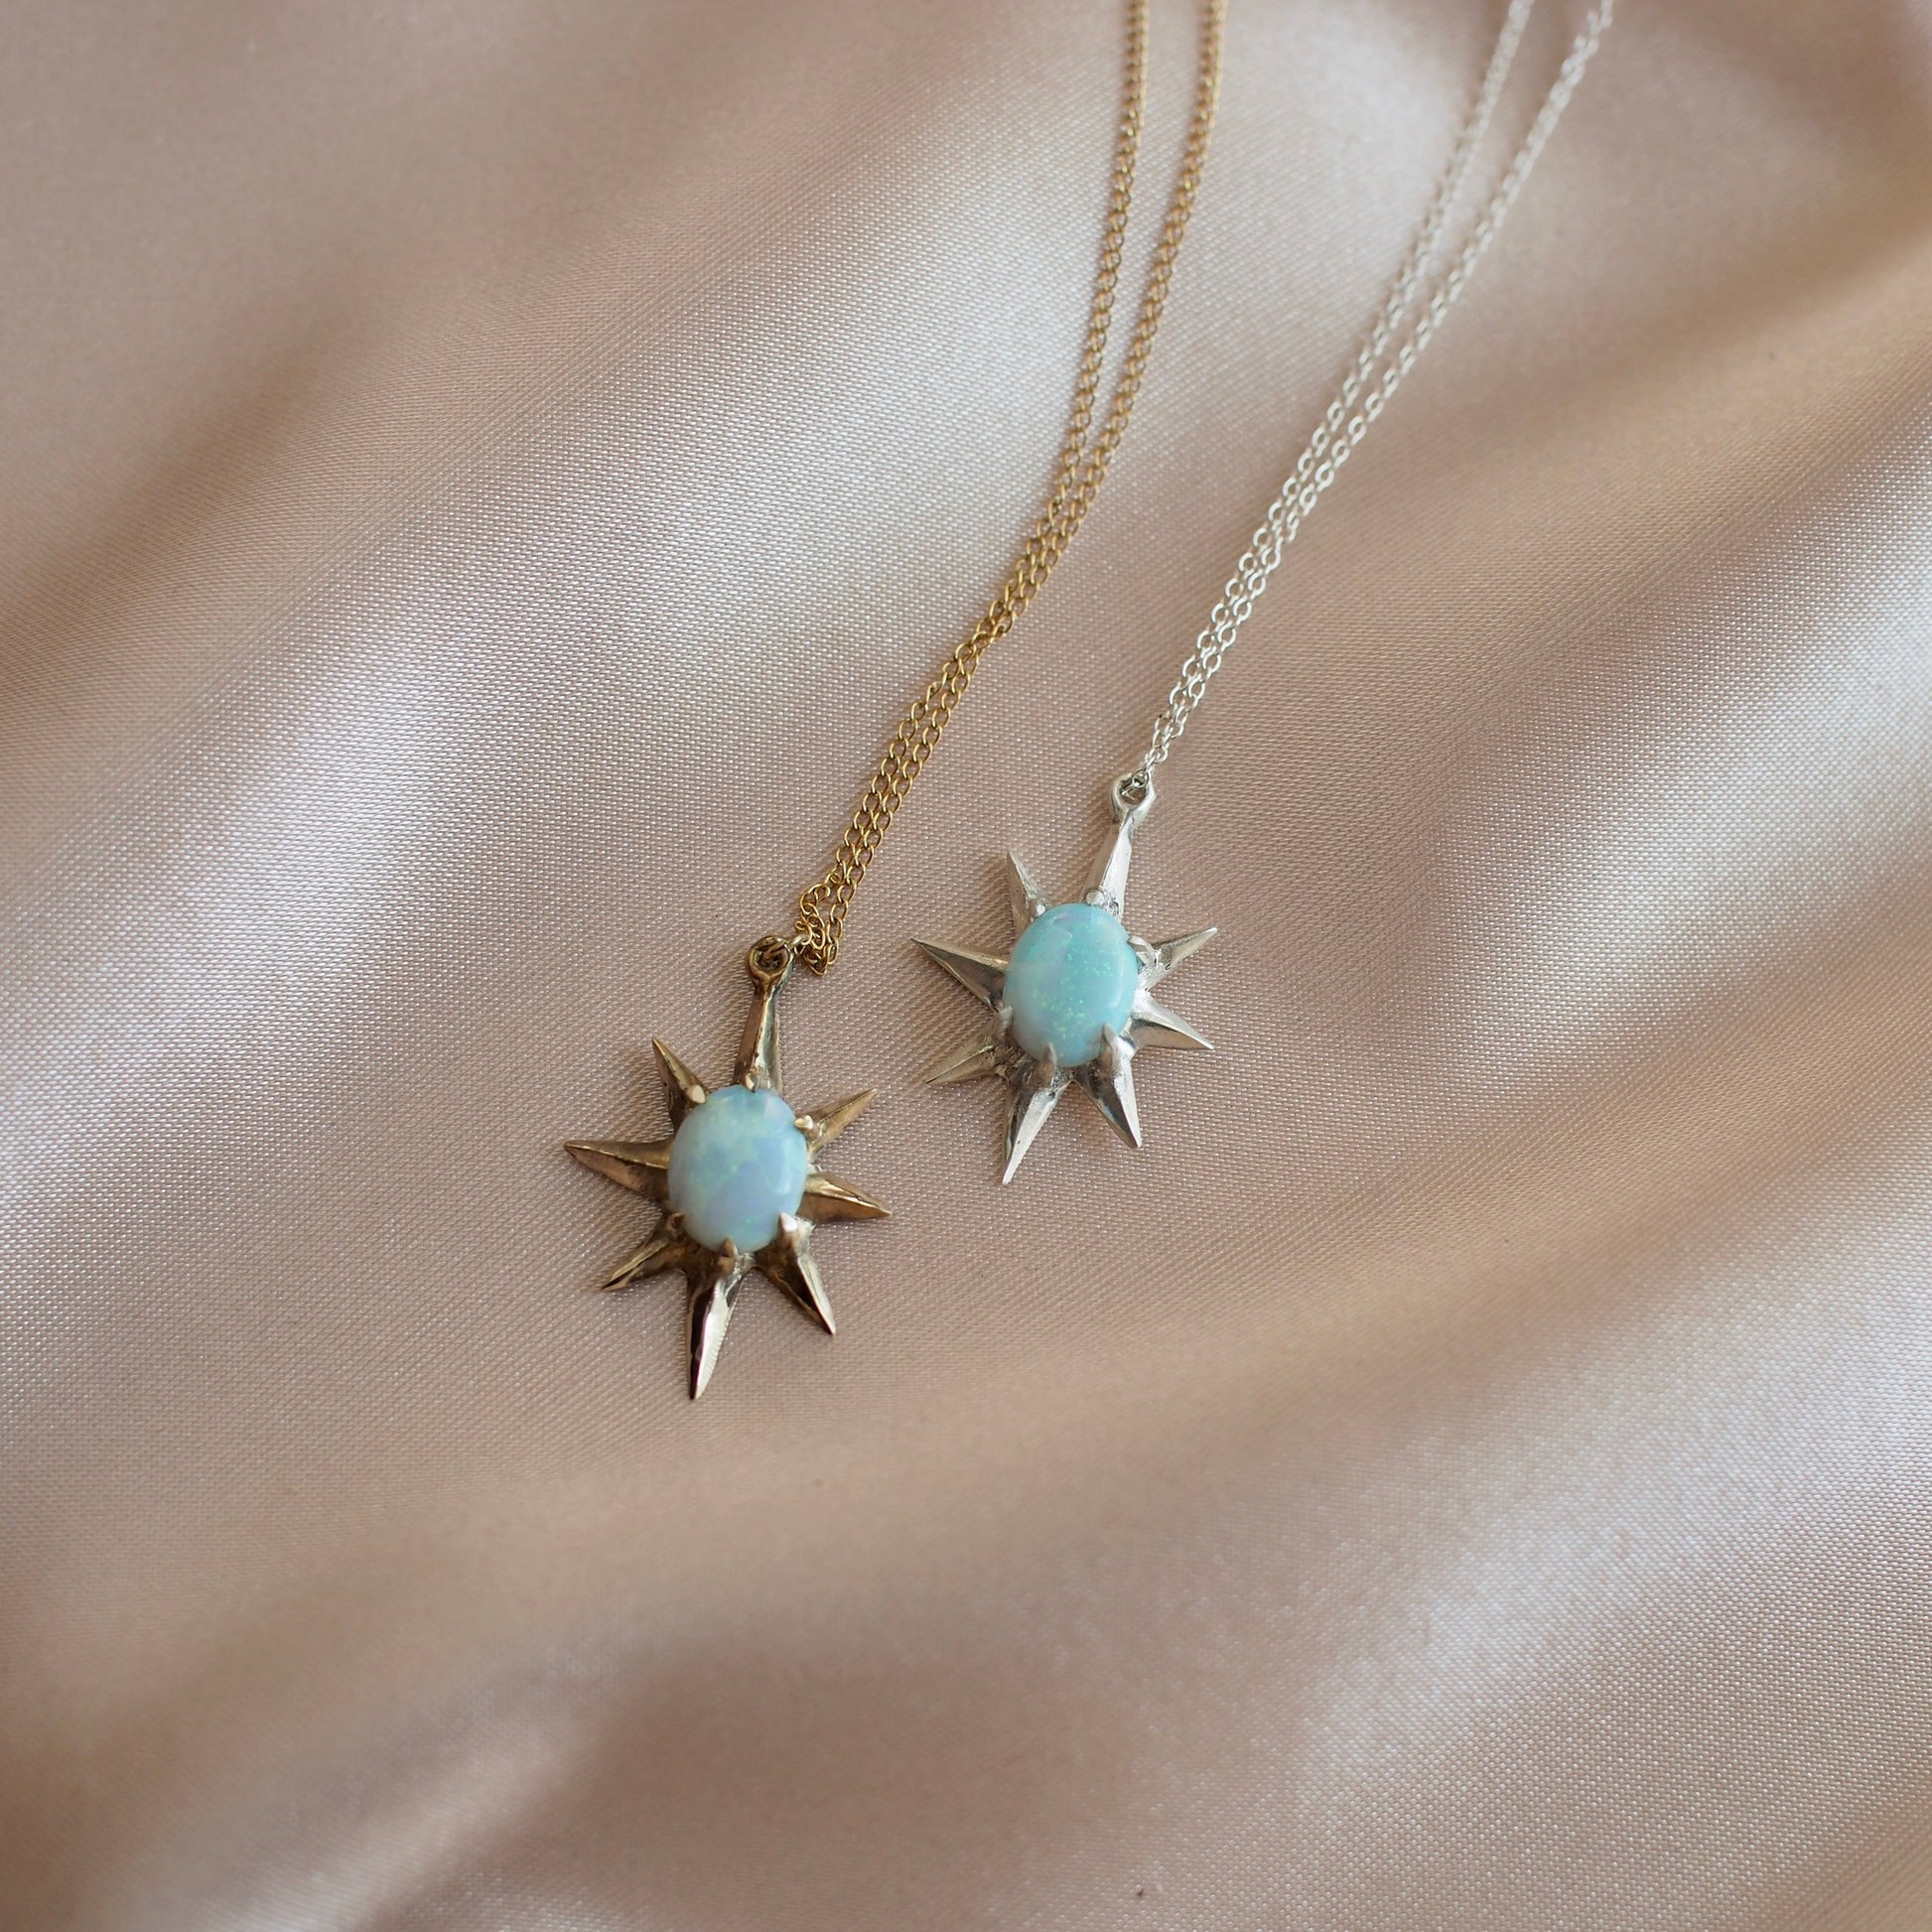 Supernova large star necklaces set with lab grown opals in sterling silver or gold tone bronze